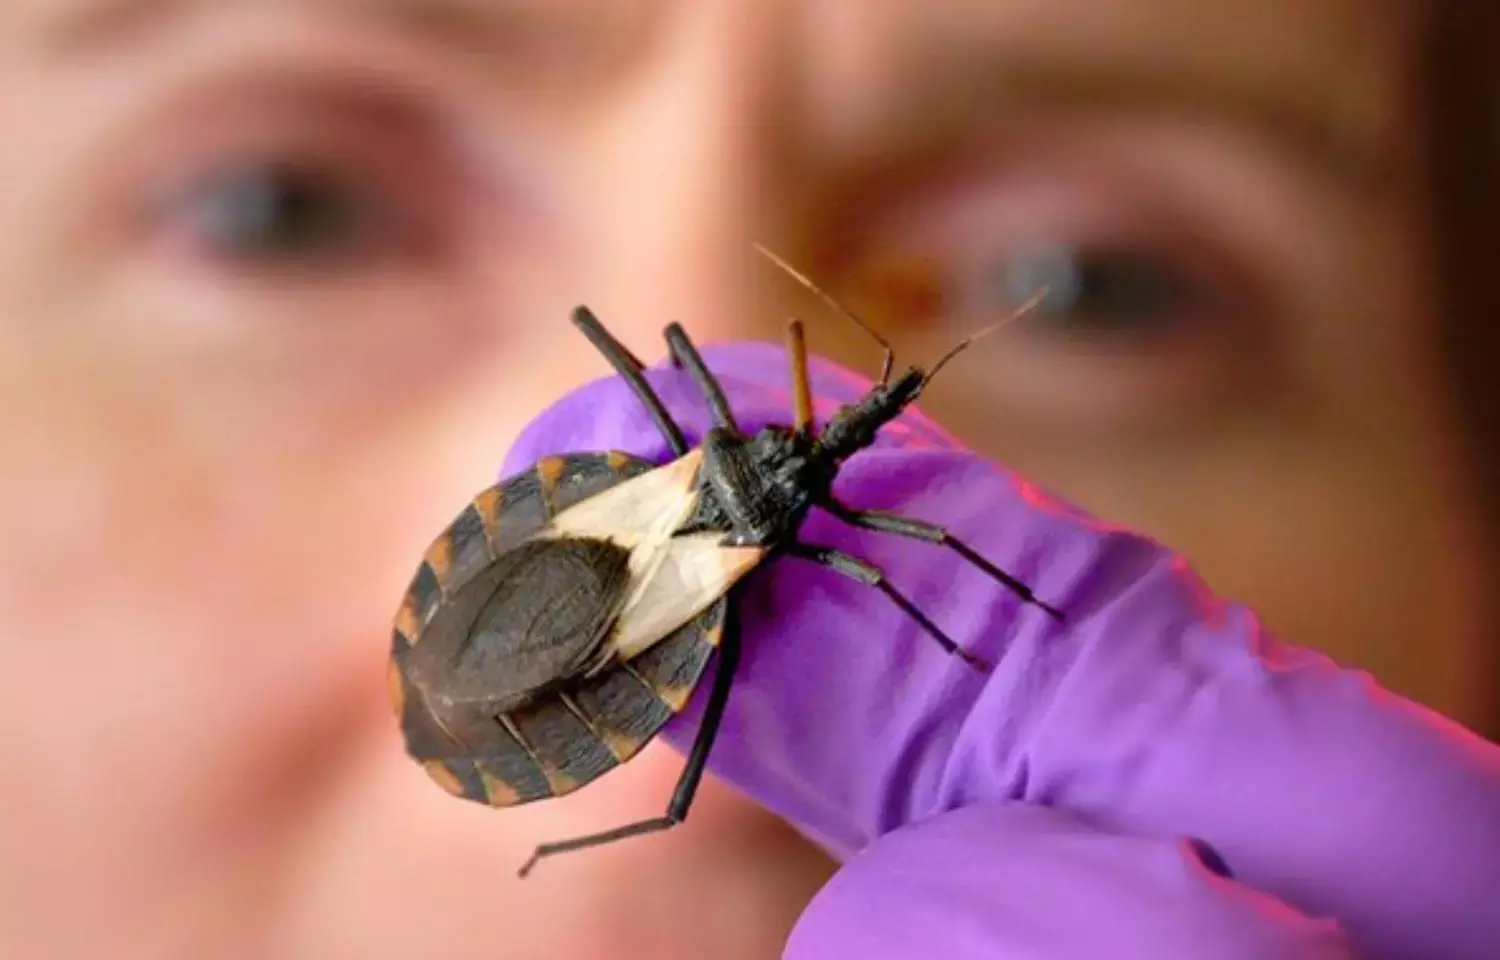 CMR reveals myocardial injury  in patients with Chagas disease for first time